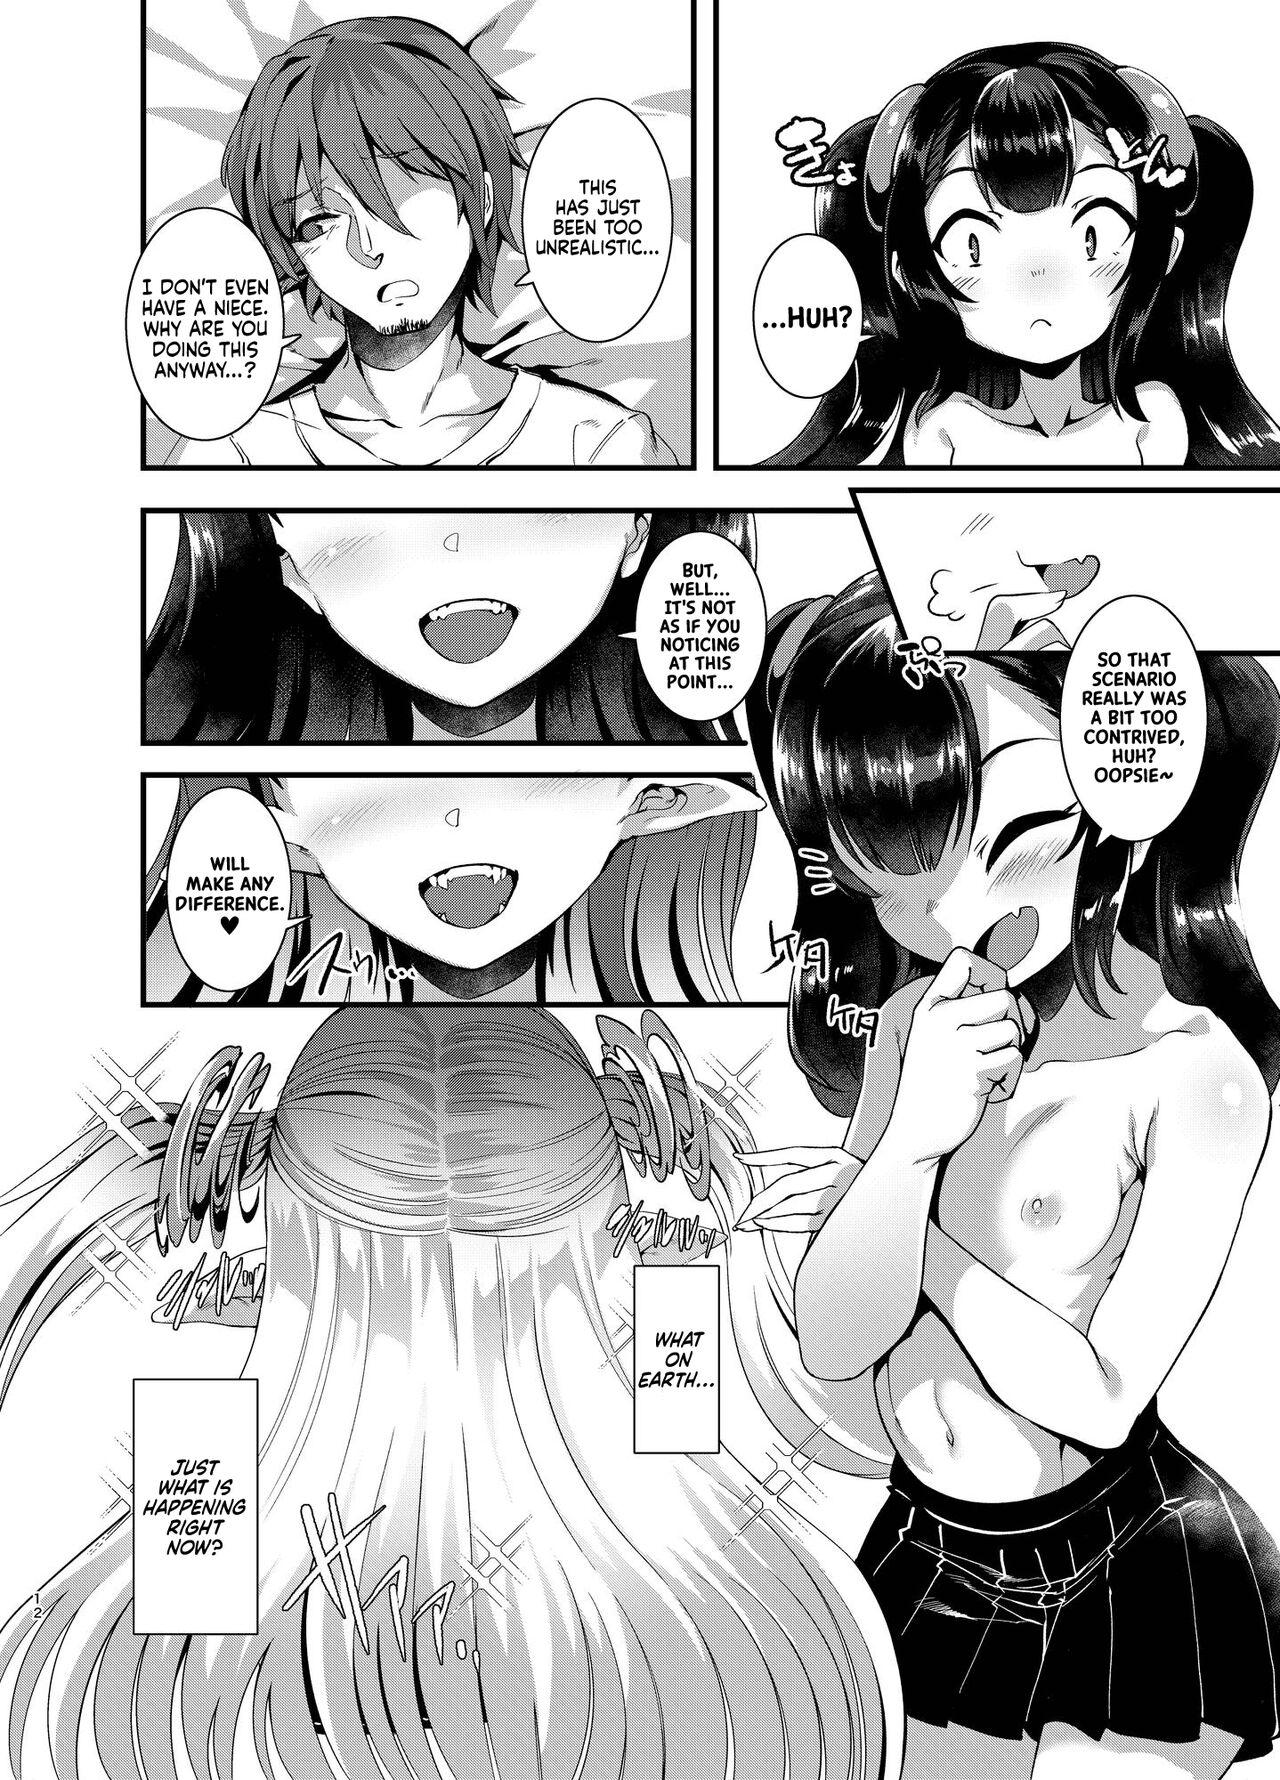 Best Blowjob Ever Gohan ni Nattene | Be My Meal - Original Swallowing - Page 12